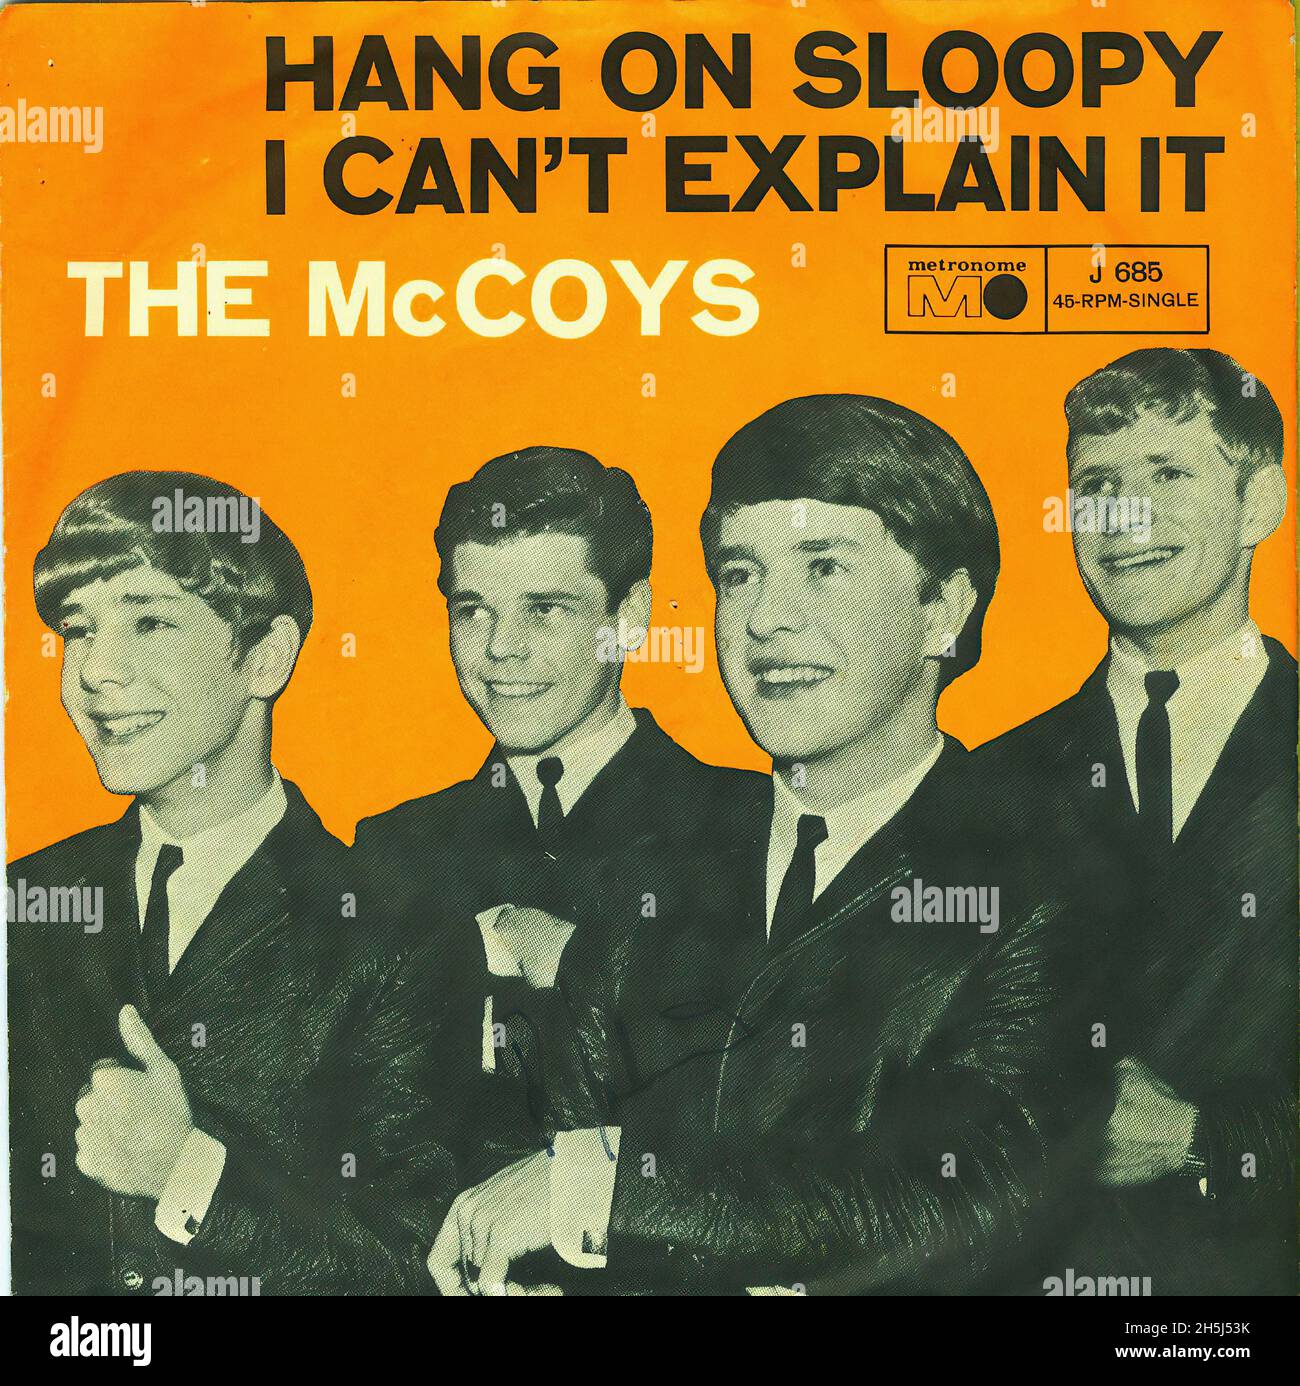 Vintage Single Record Cover - McCoys, The - Hang On Sloopy - D - 1965  Stockfotografie - Alamy